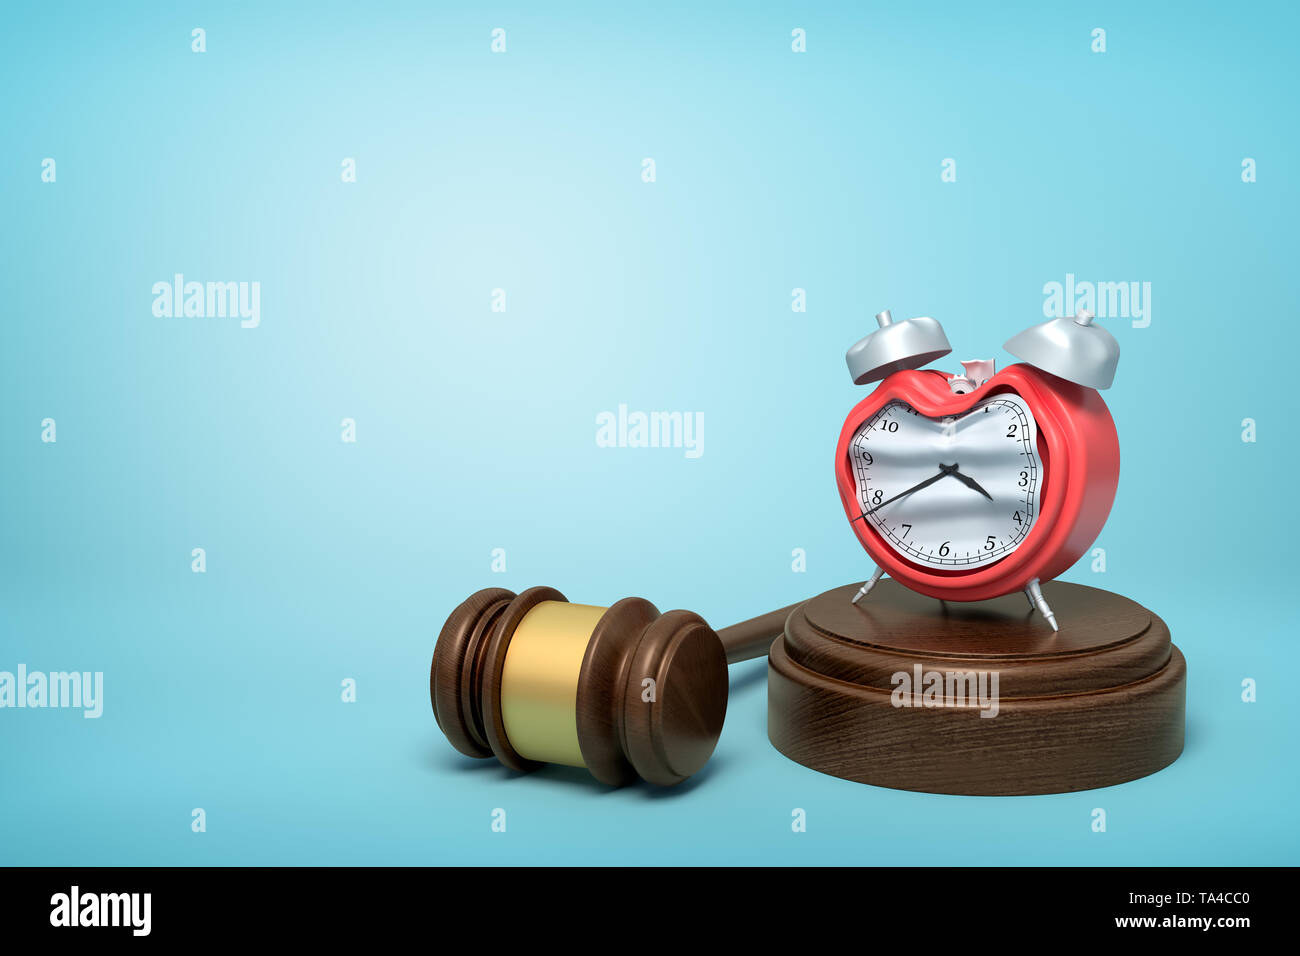 3d rendering of smashed broken alarn clock on round wooden block and brown wooden gavel on blue background Stock Photo